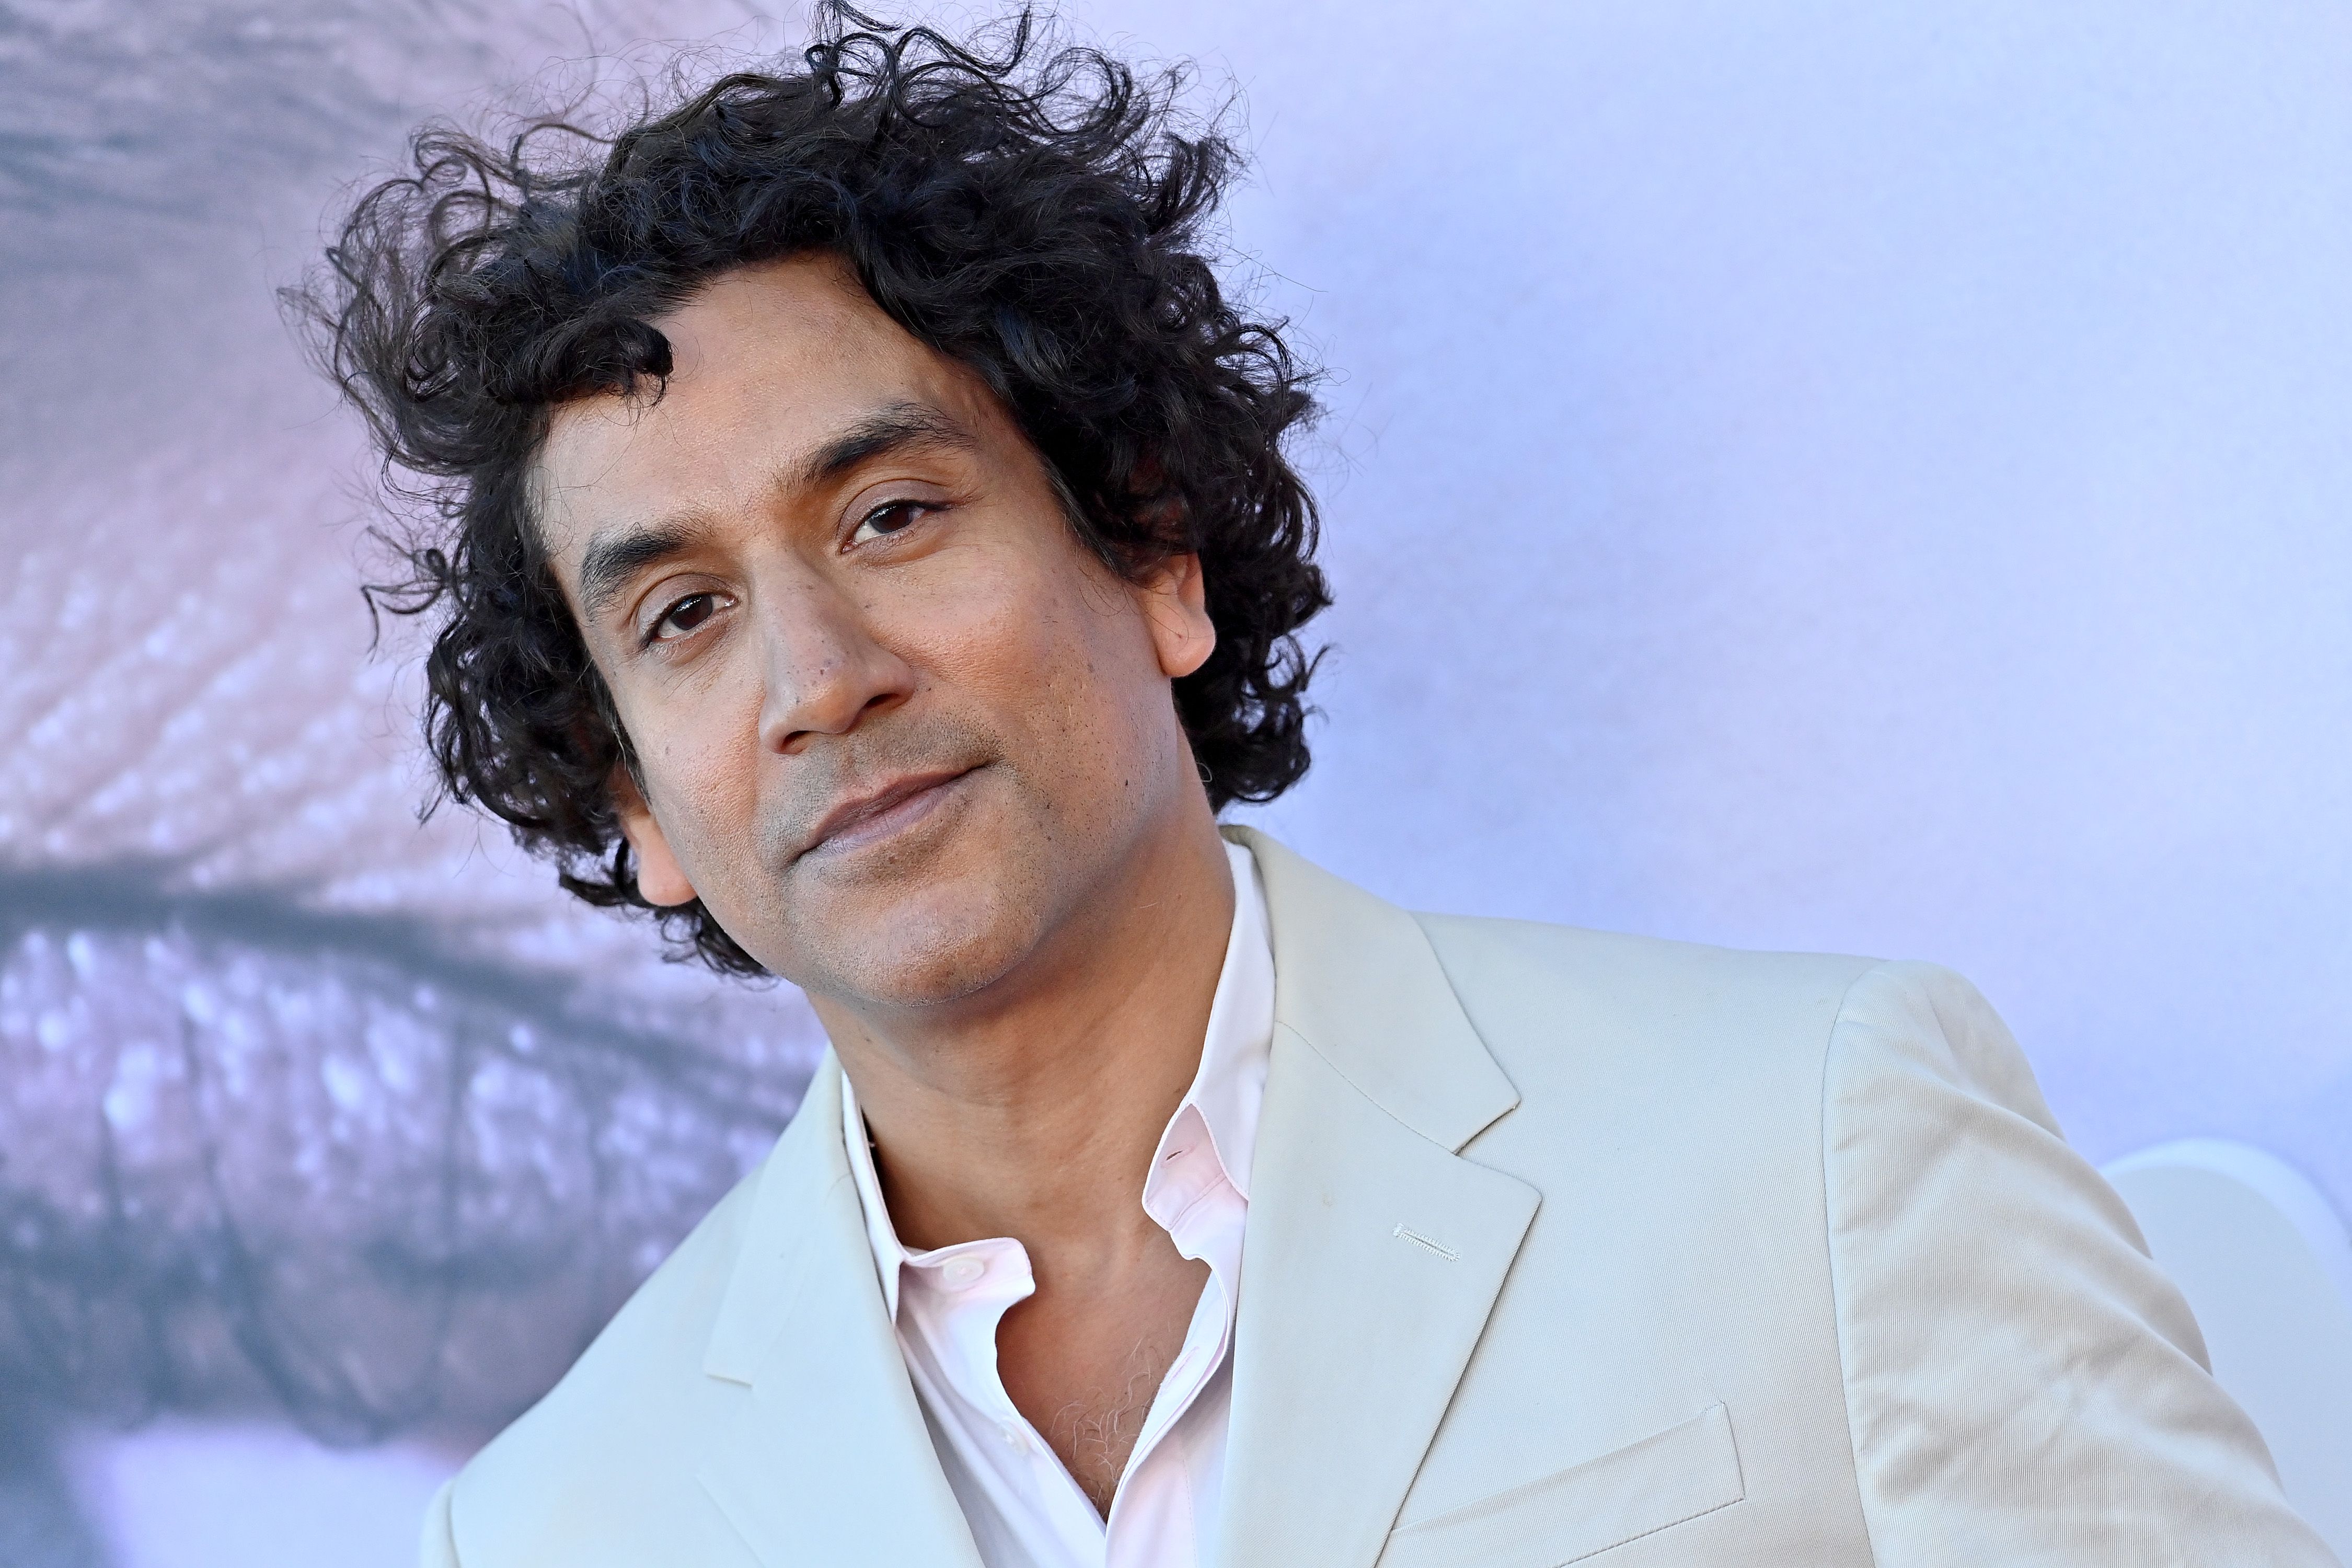 Lost's Naveen Andrews cast in season 2 of The Cleaning Lady